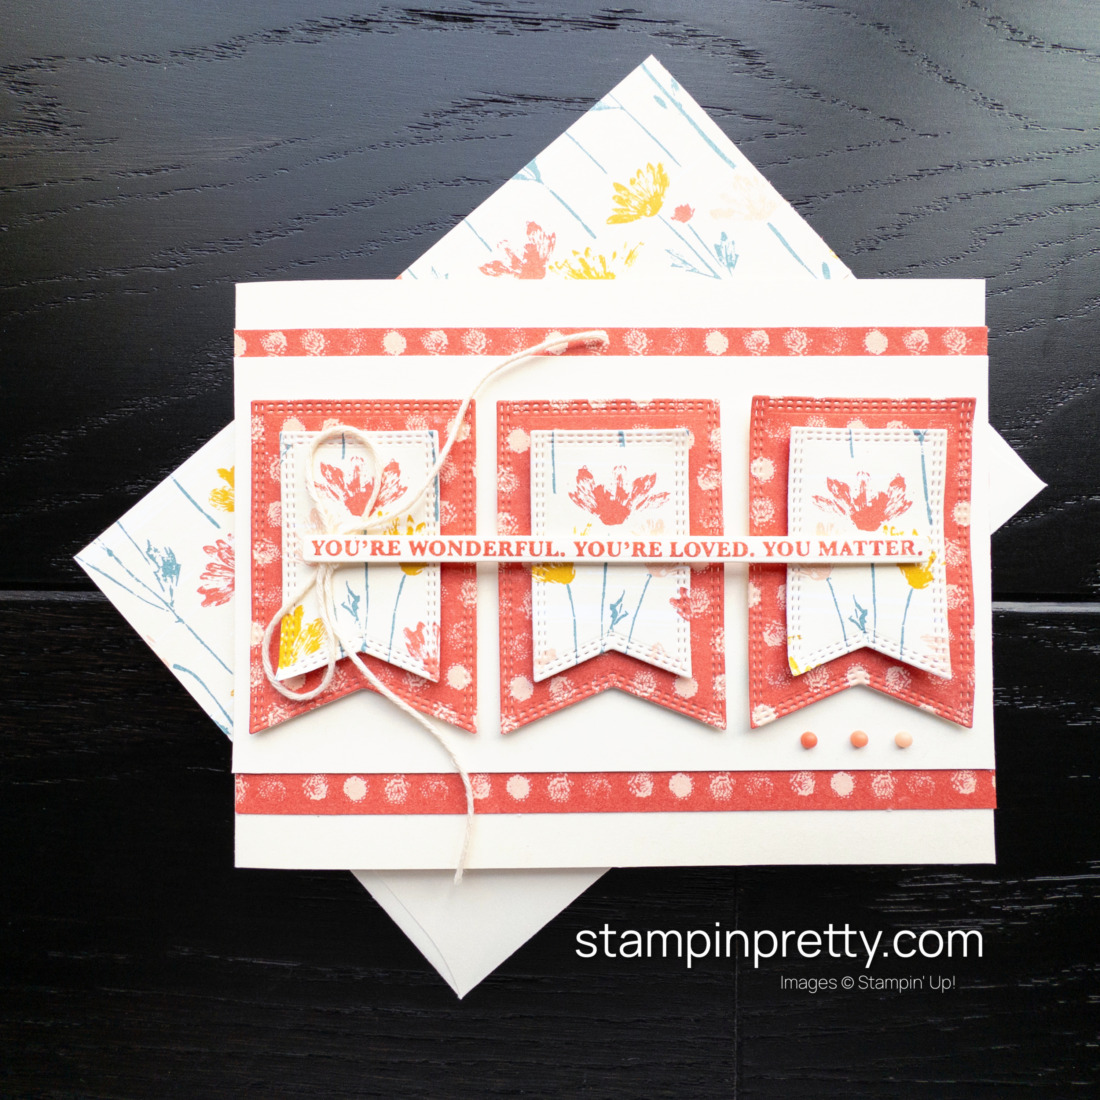 Create this friend card using the Nested Essentials Dies and Wonderful Thoughts Stamp Set by Stampin' Up! Card design by Mary Fish, Stampin' Pretty